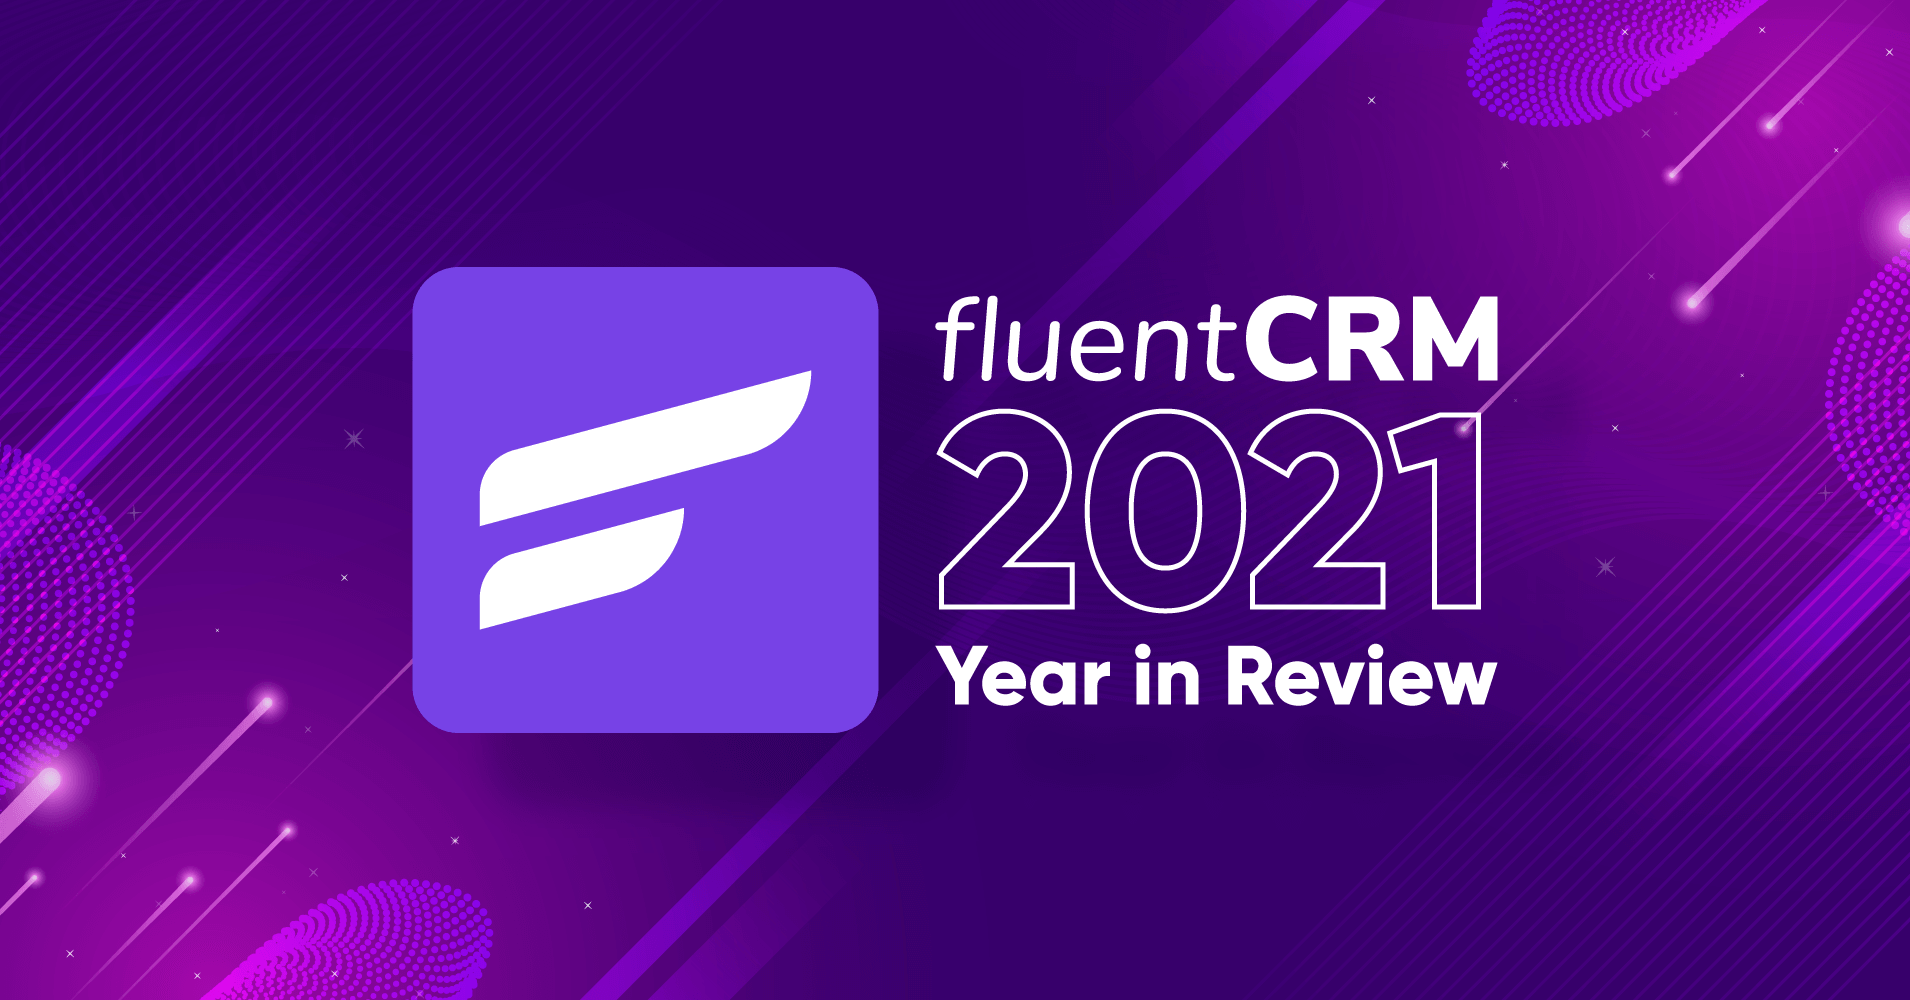 FluentCRM Year in Review 2021 – The First of Many!